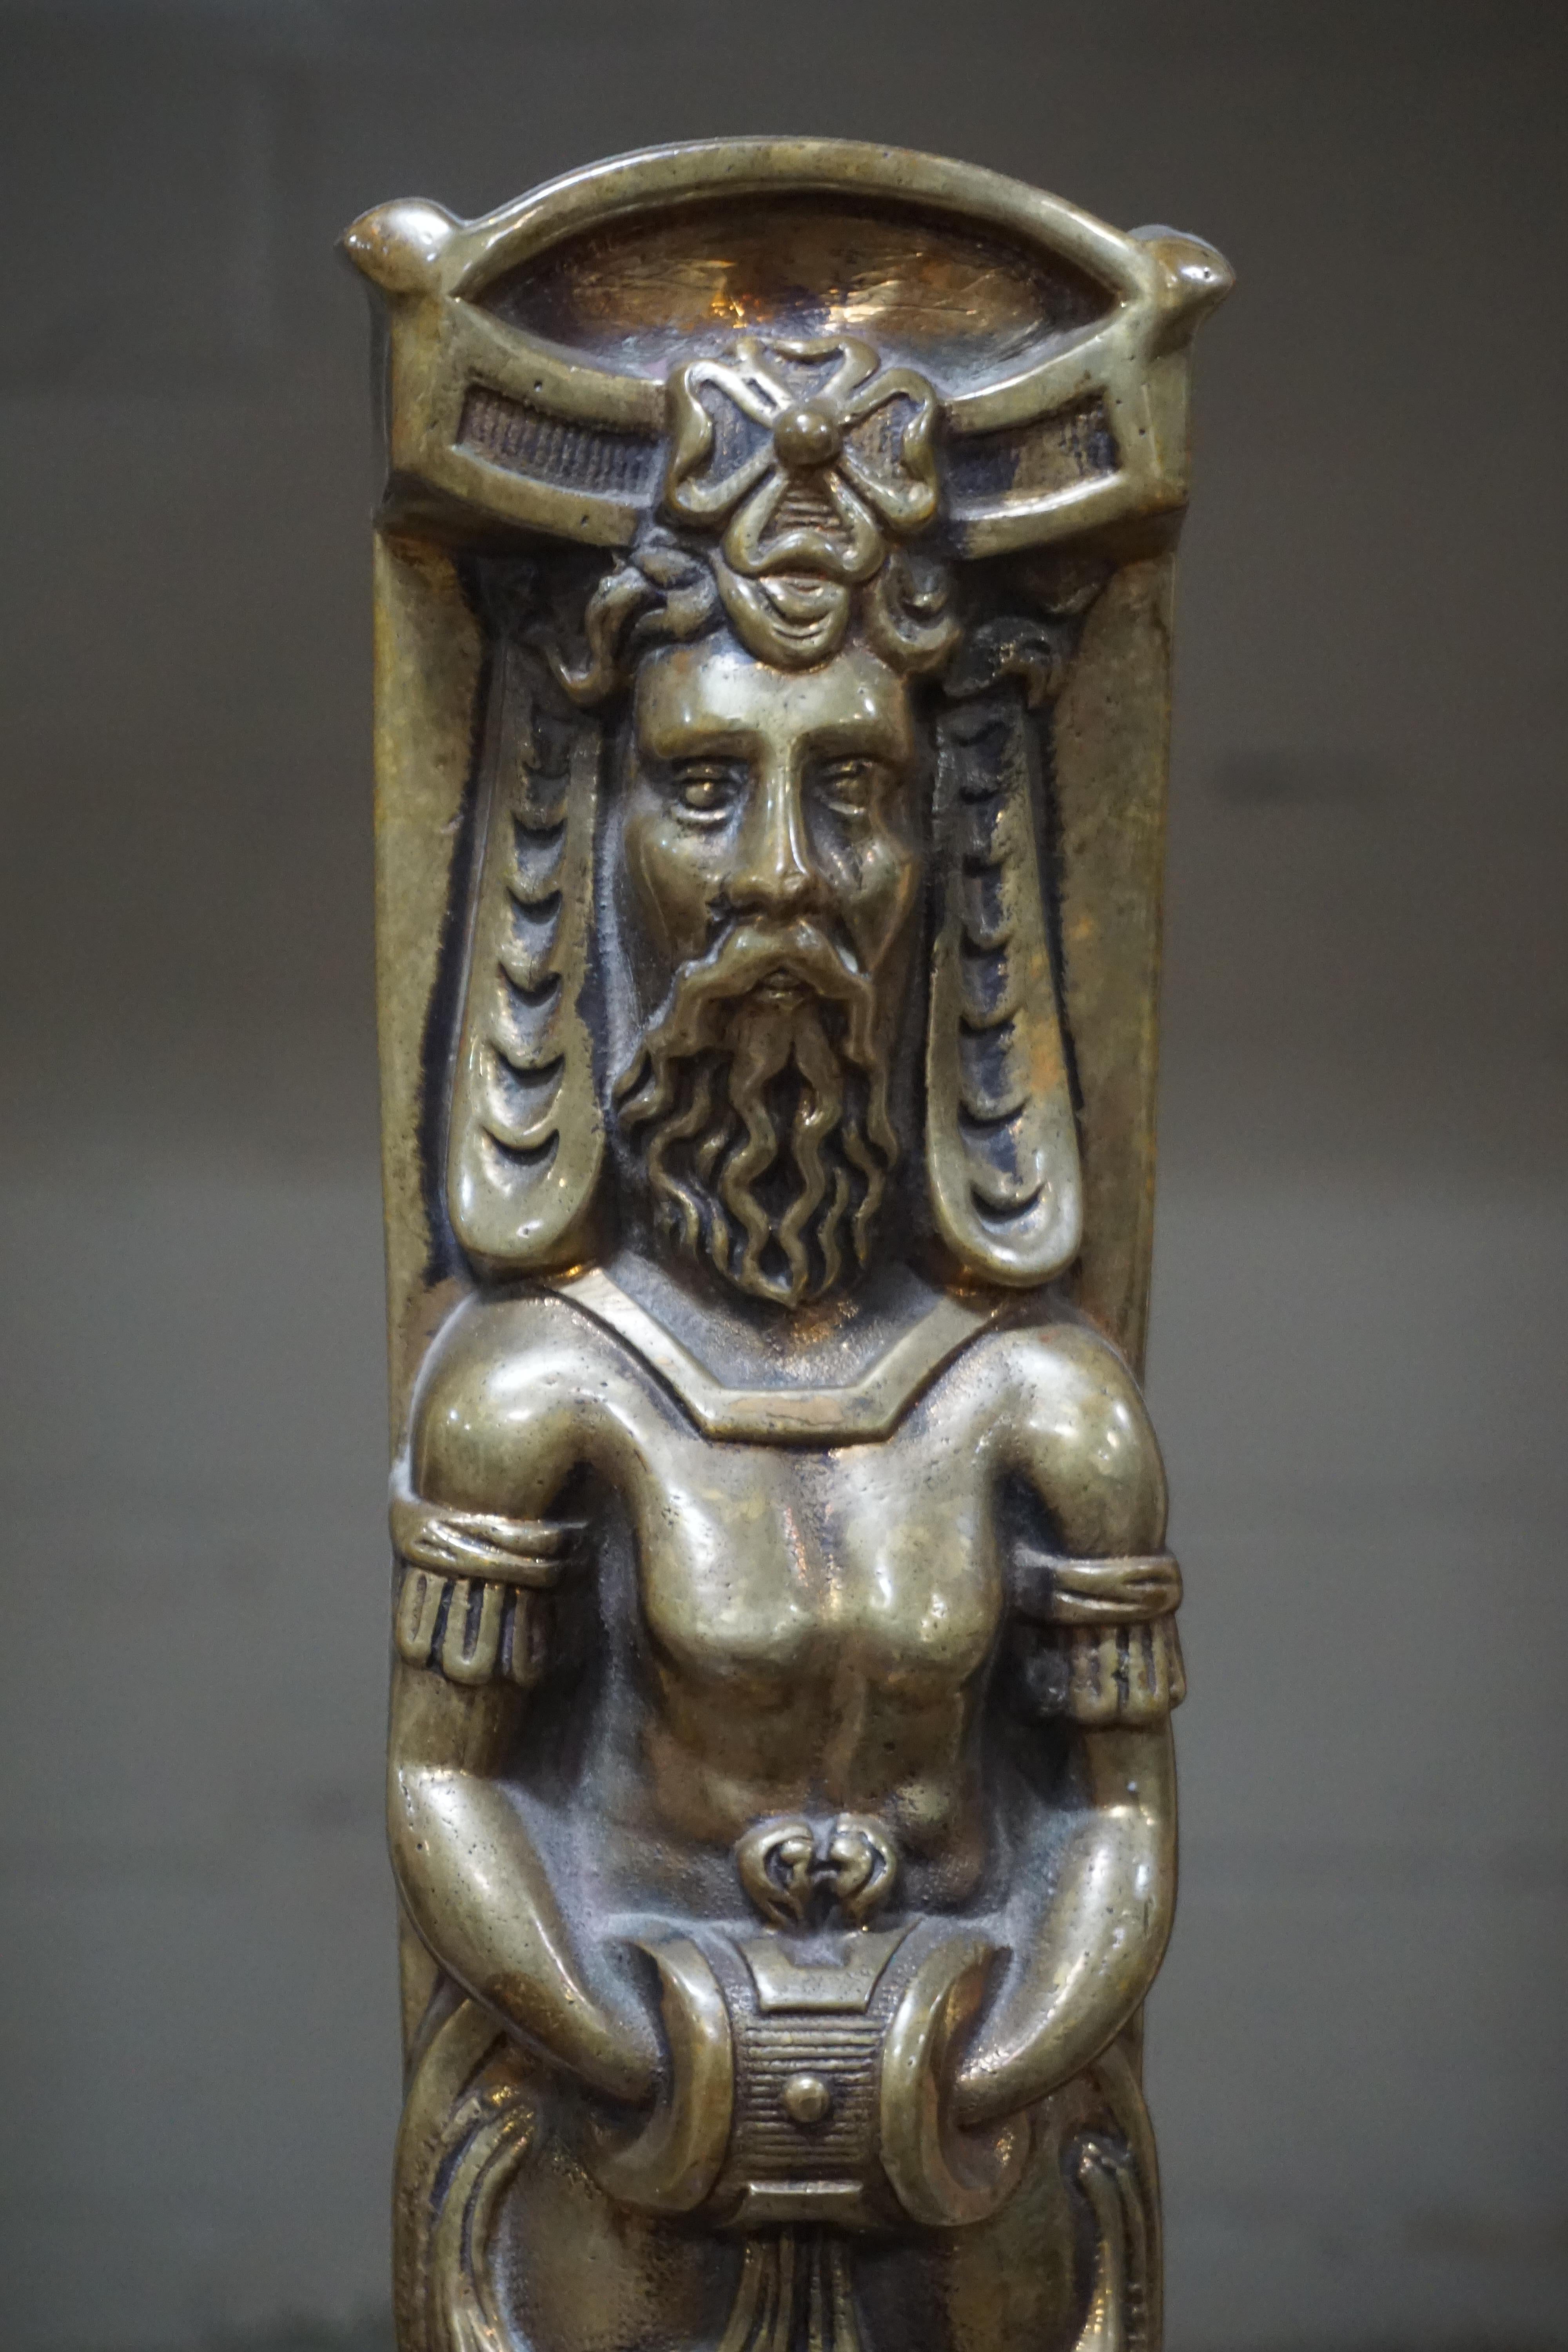 Each in the form of a tapering standard with an elaborate male figurehead, the body of which forms a caduceus, centred with a grape leaf, and terminating in a lion’s paw. The uprights are mounted on elaborate arched bases with paw feet, featuring